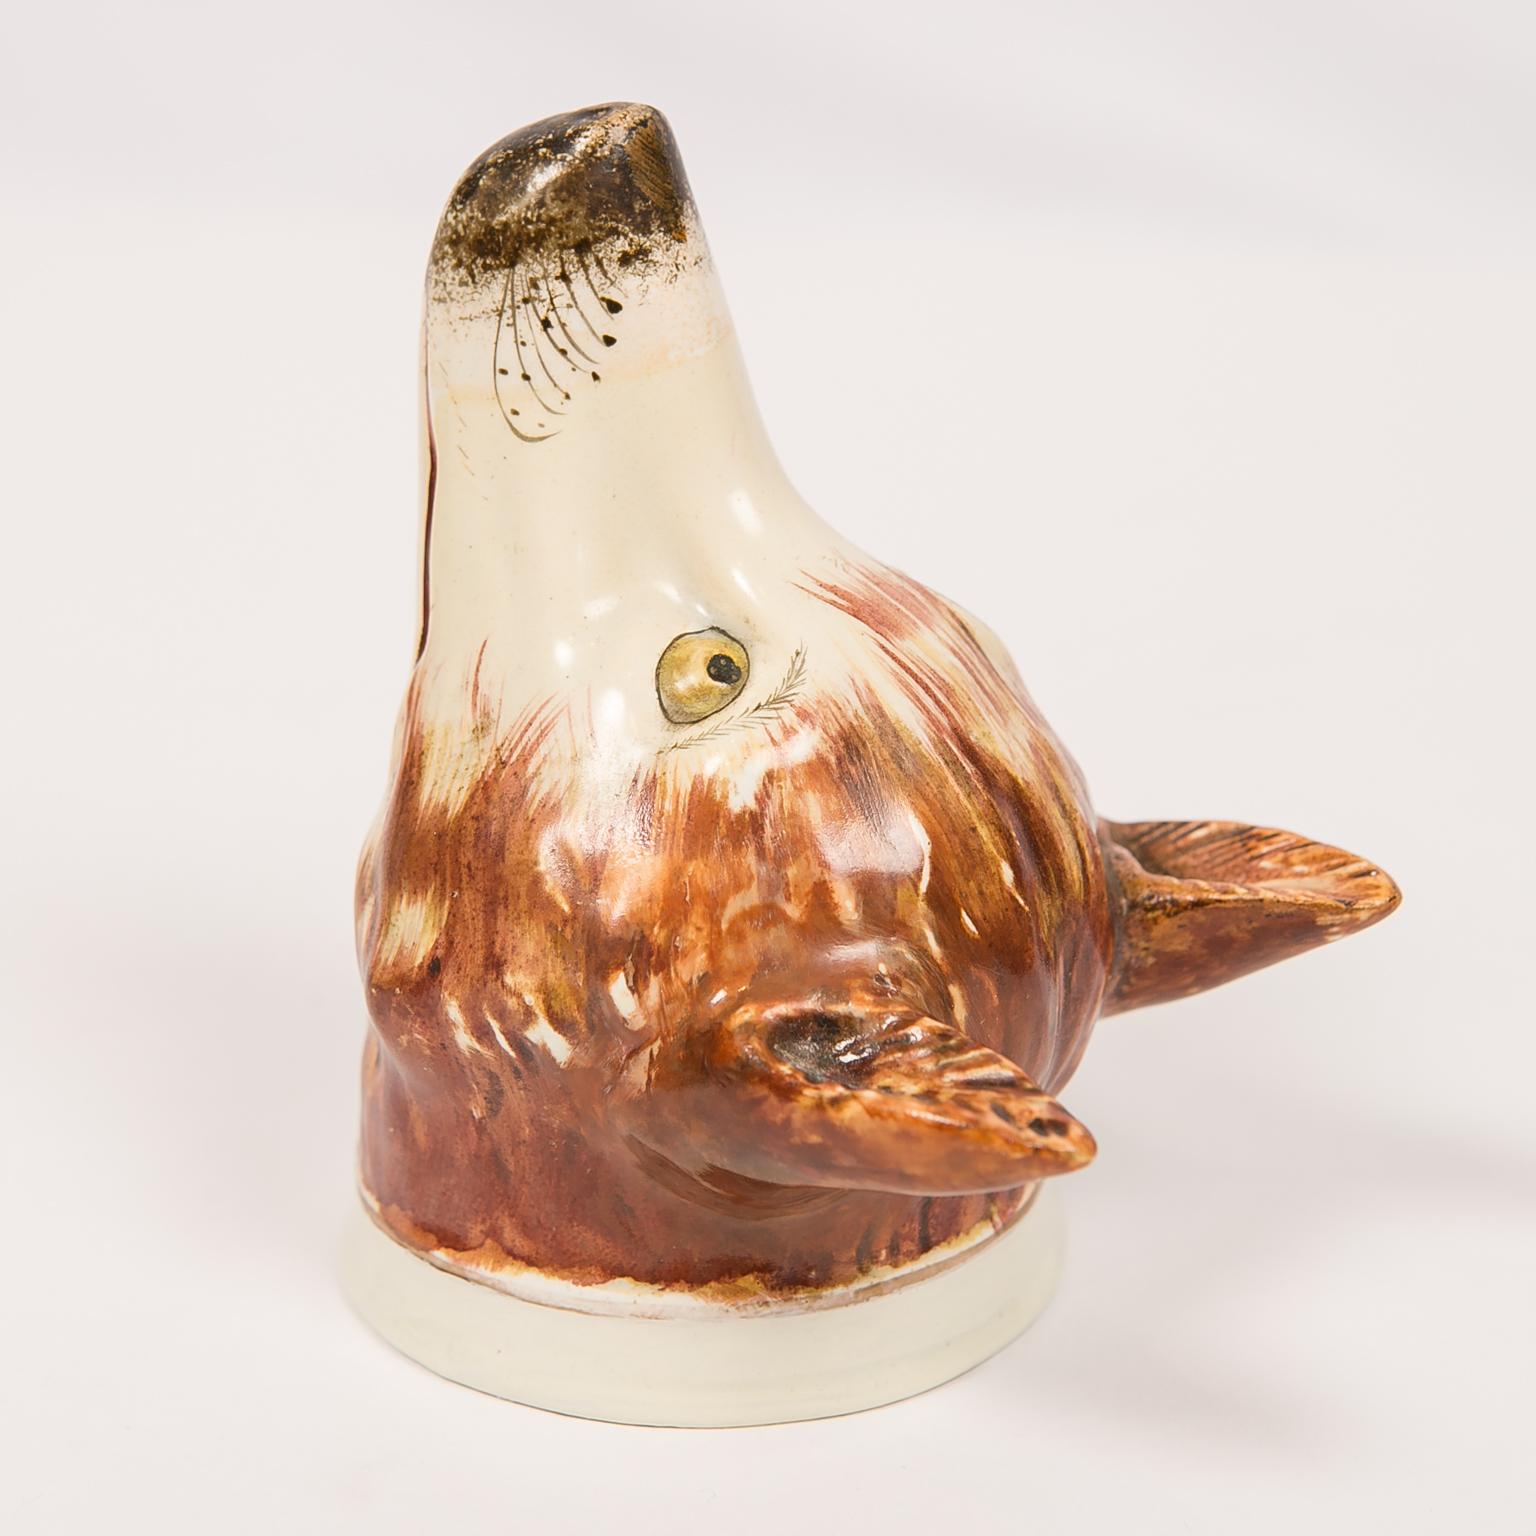 18th Century Fox Head Stirrup Cup Deaccessioned from Colonial Williamsburg